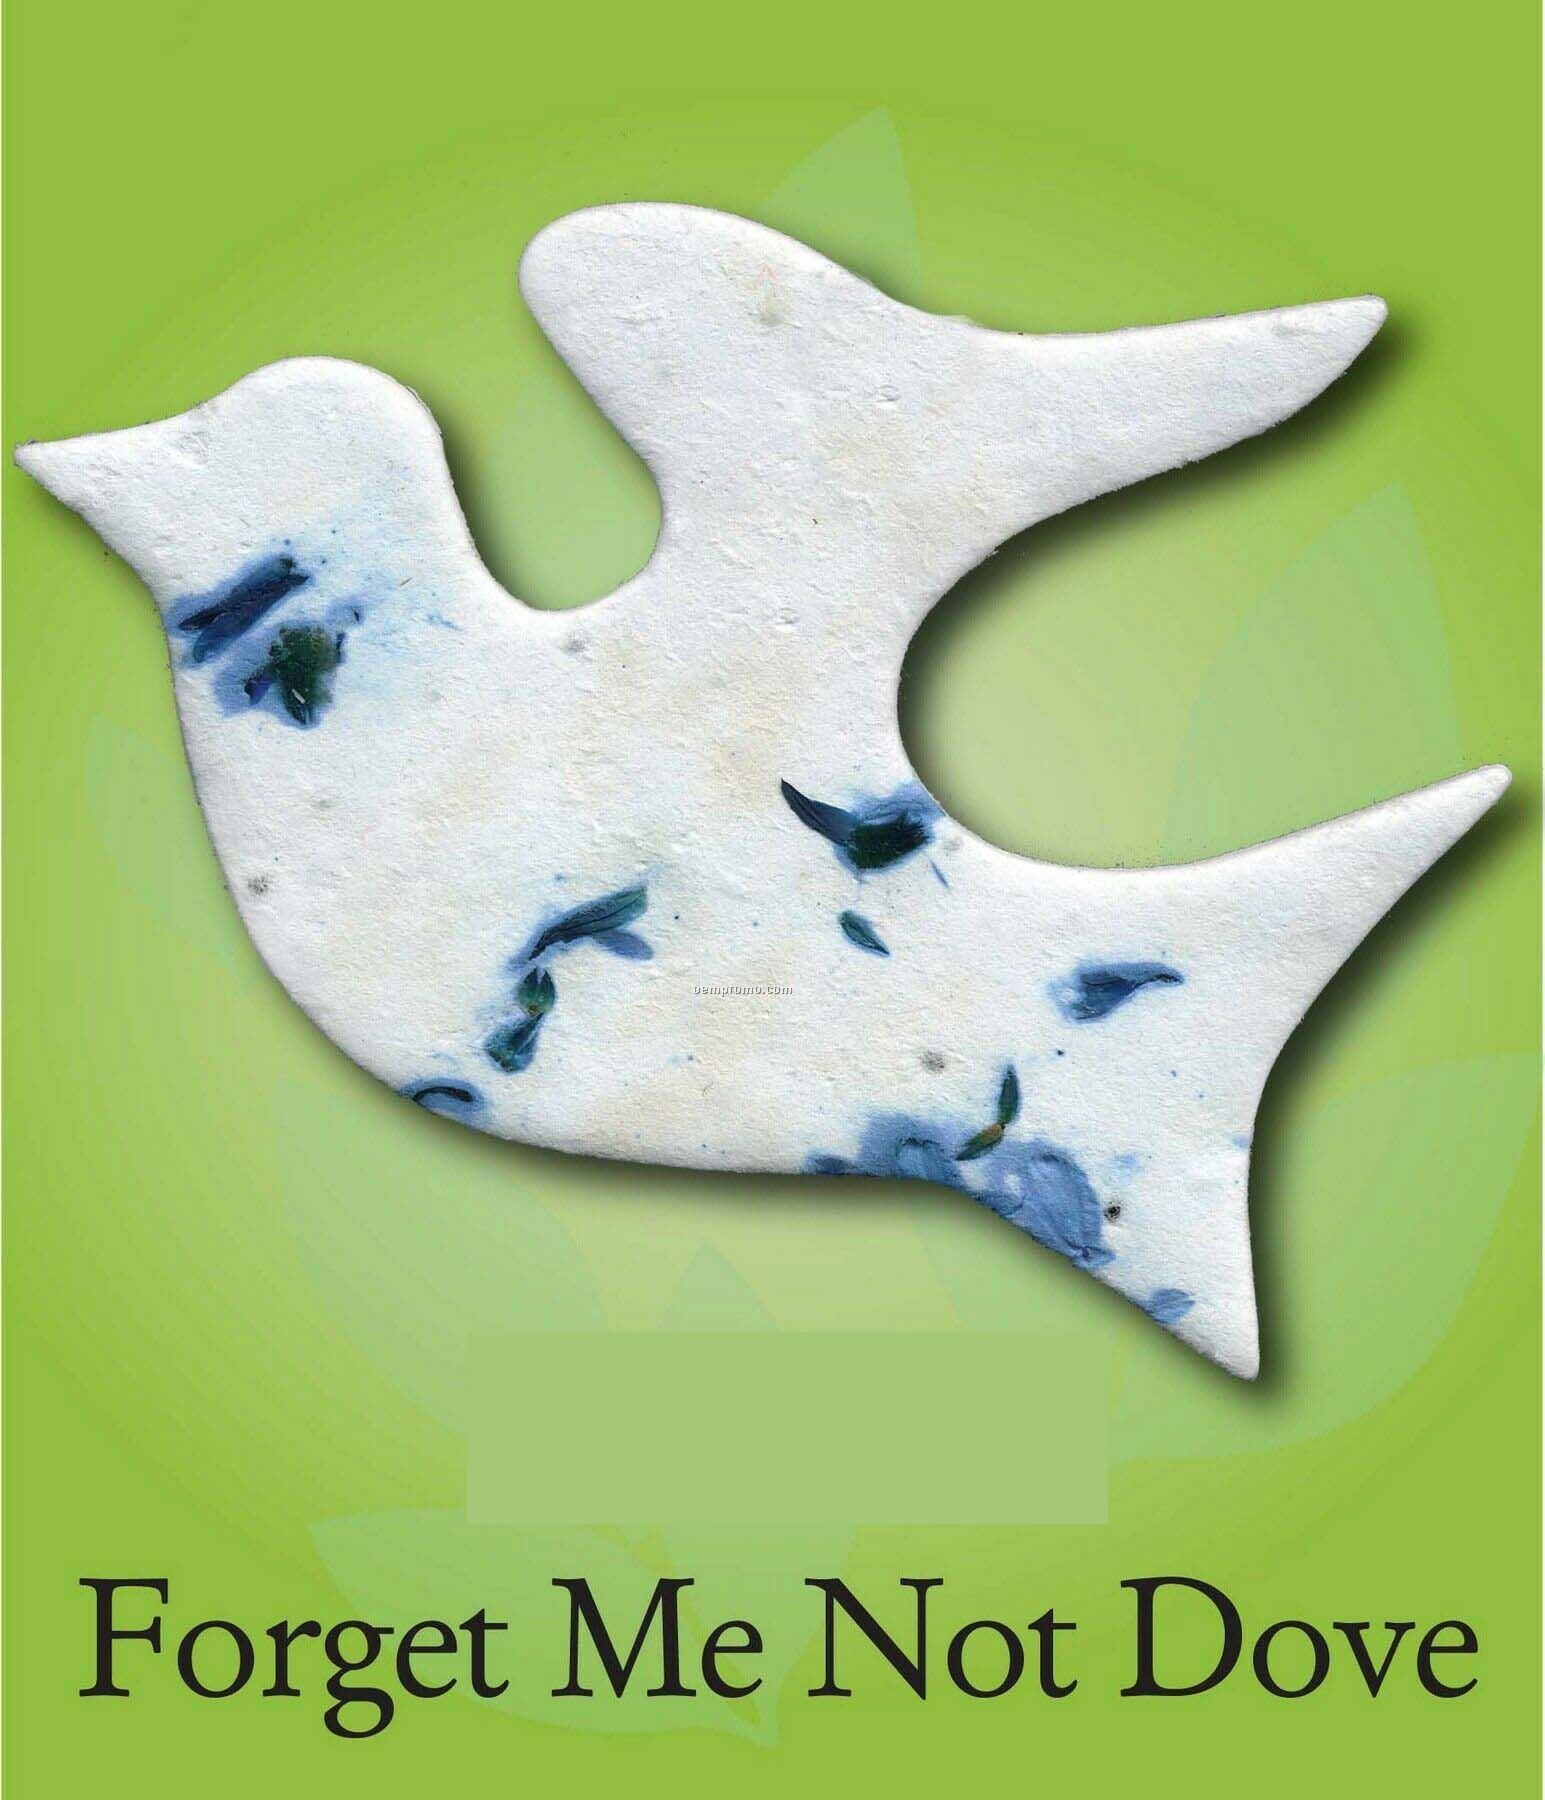 Forget Me Not Dove Ornament With Embedded Seed